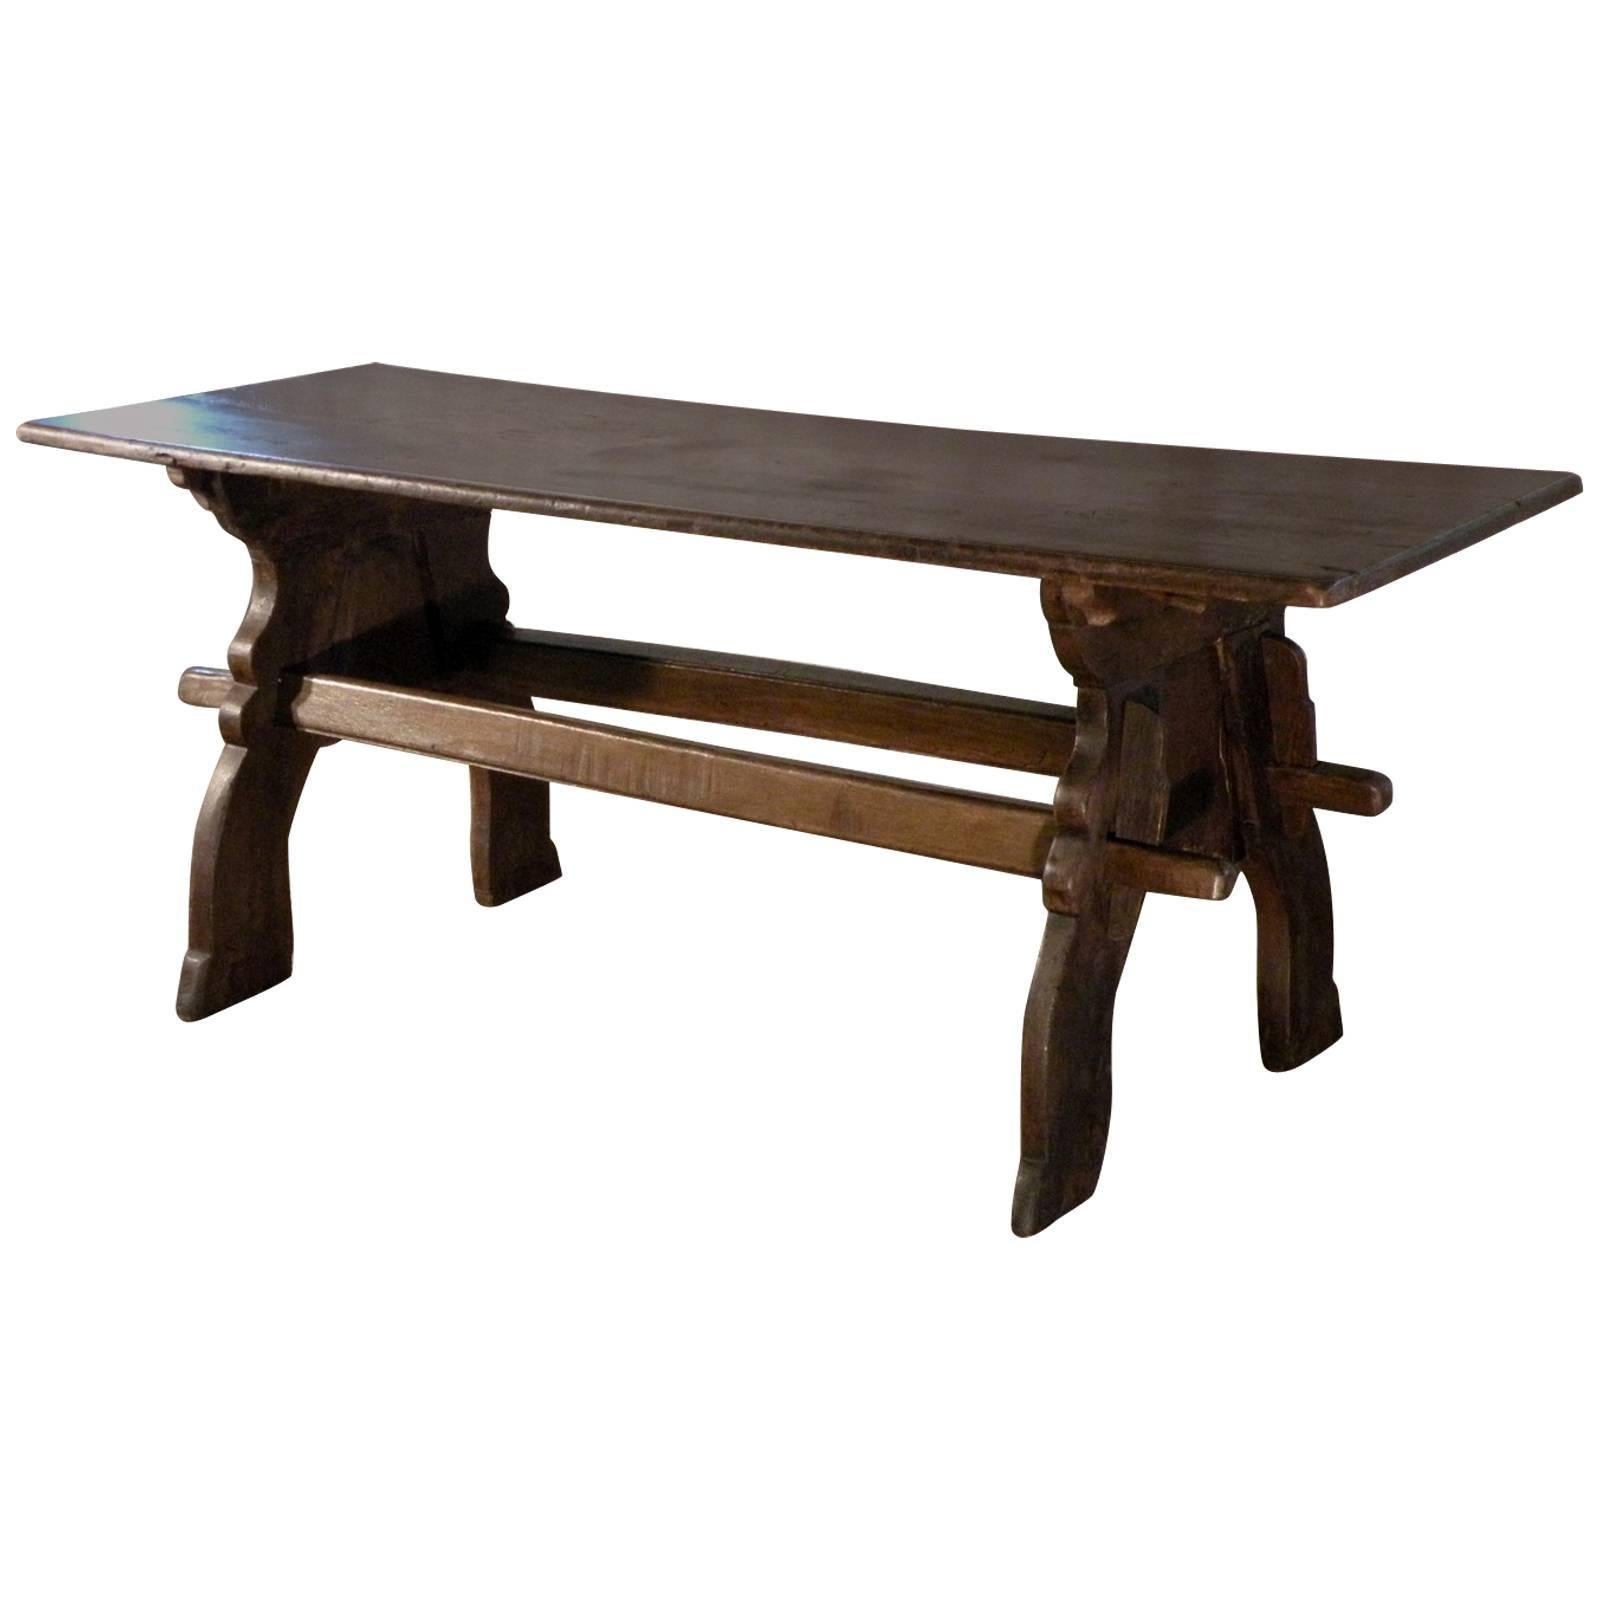 Late Gothic 16th century North European Oak Trestle Table For Sale